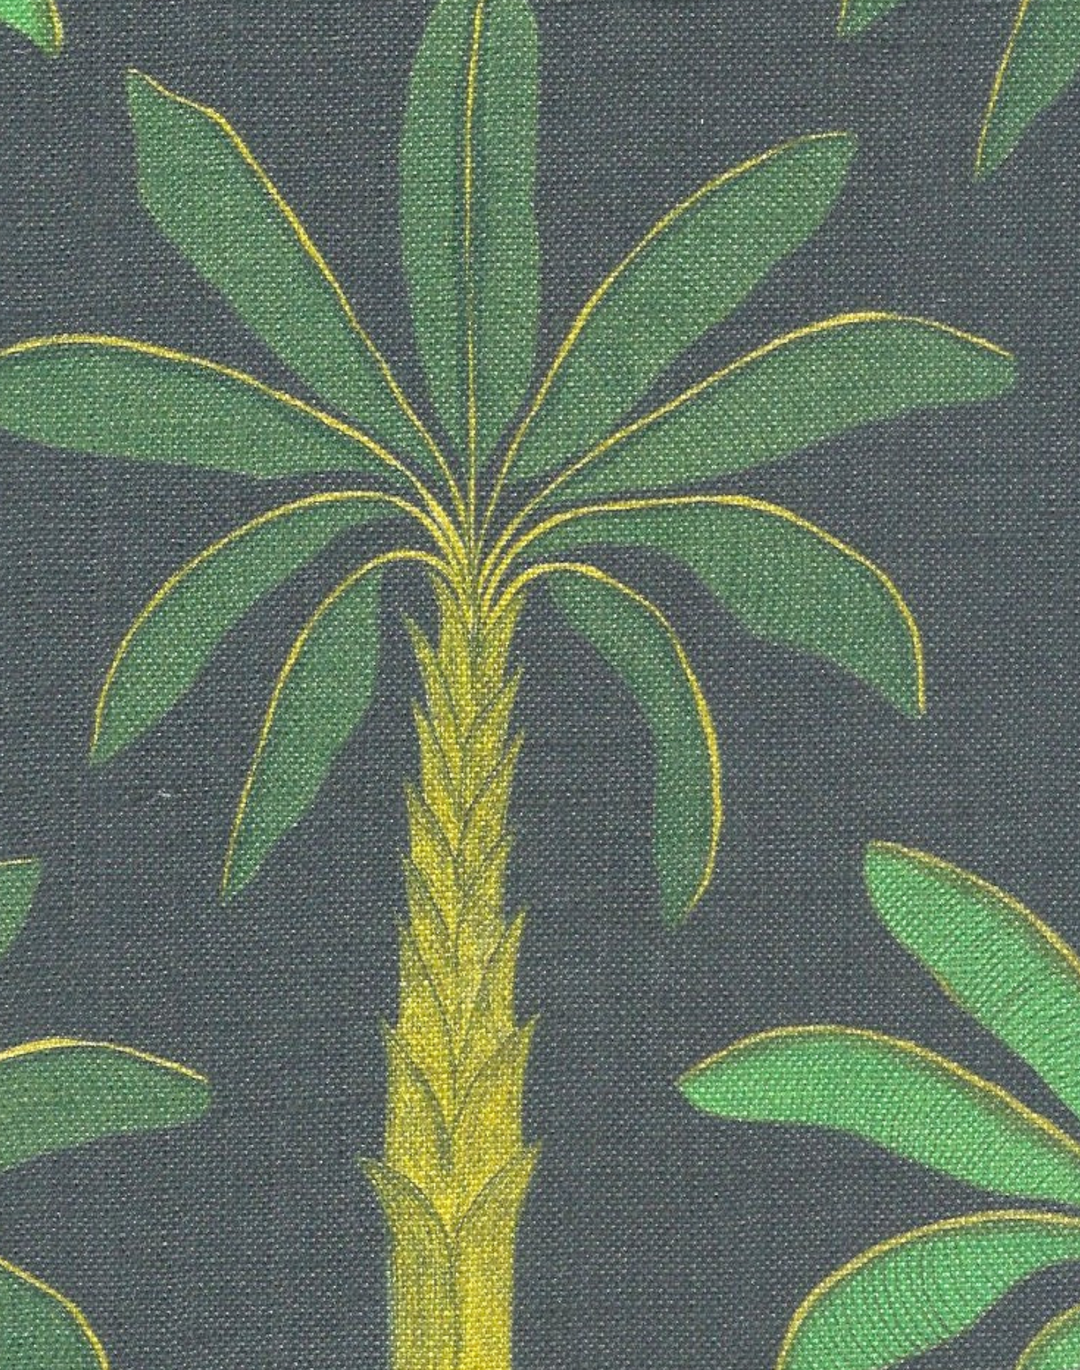 Tropical Fabric, Carbon